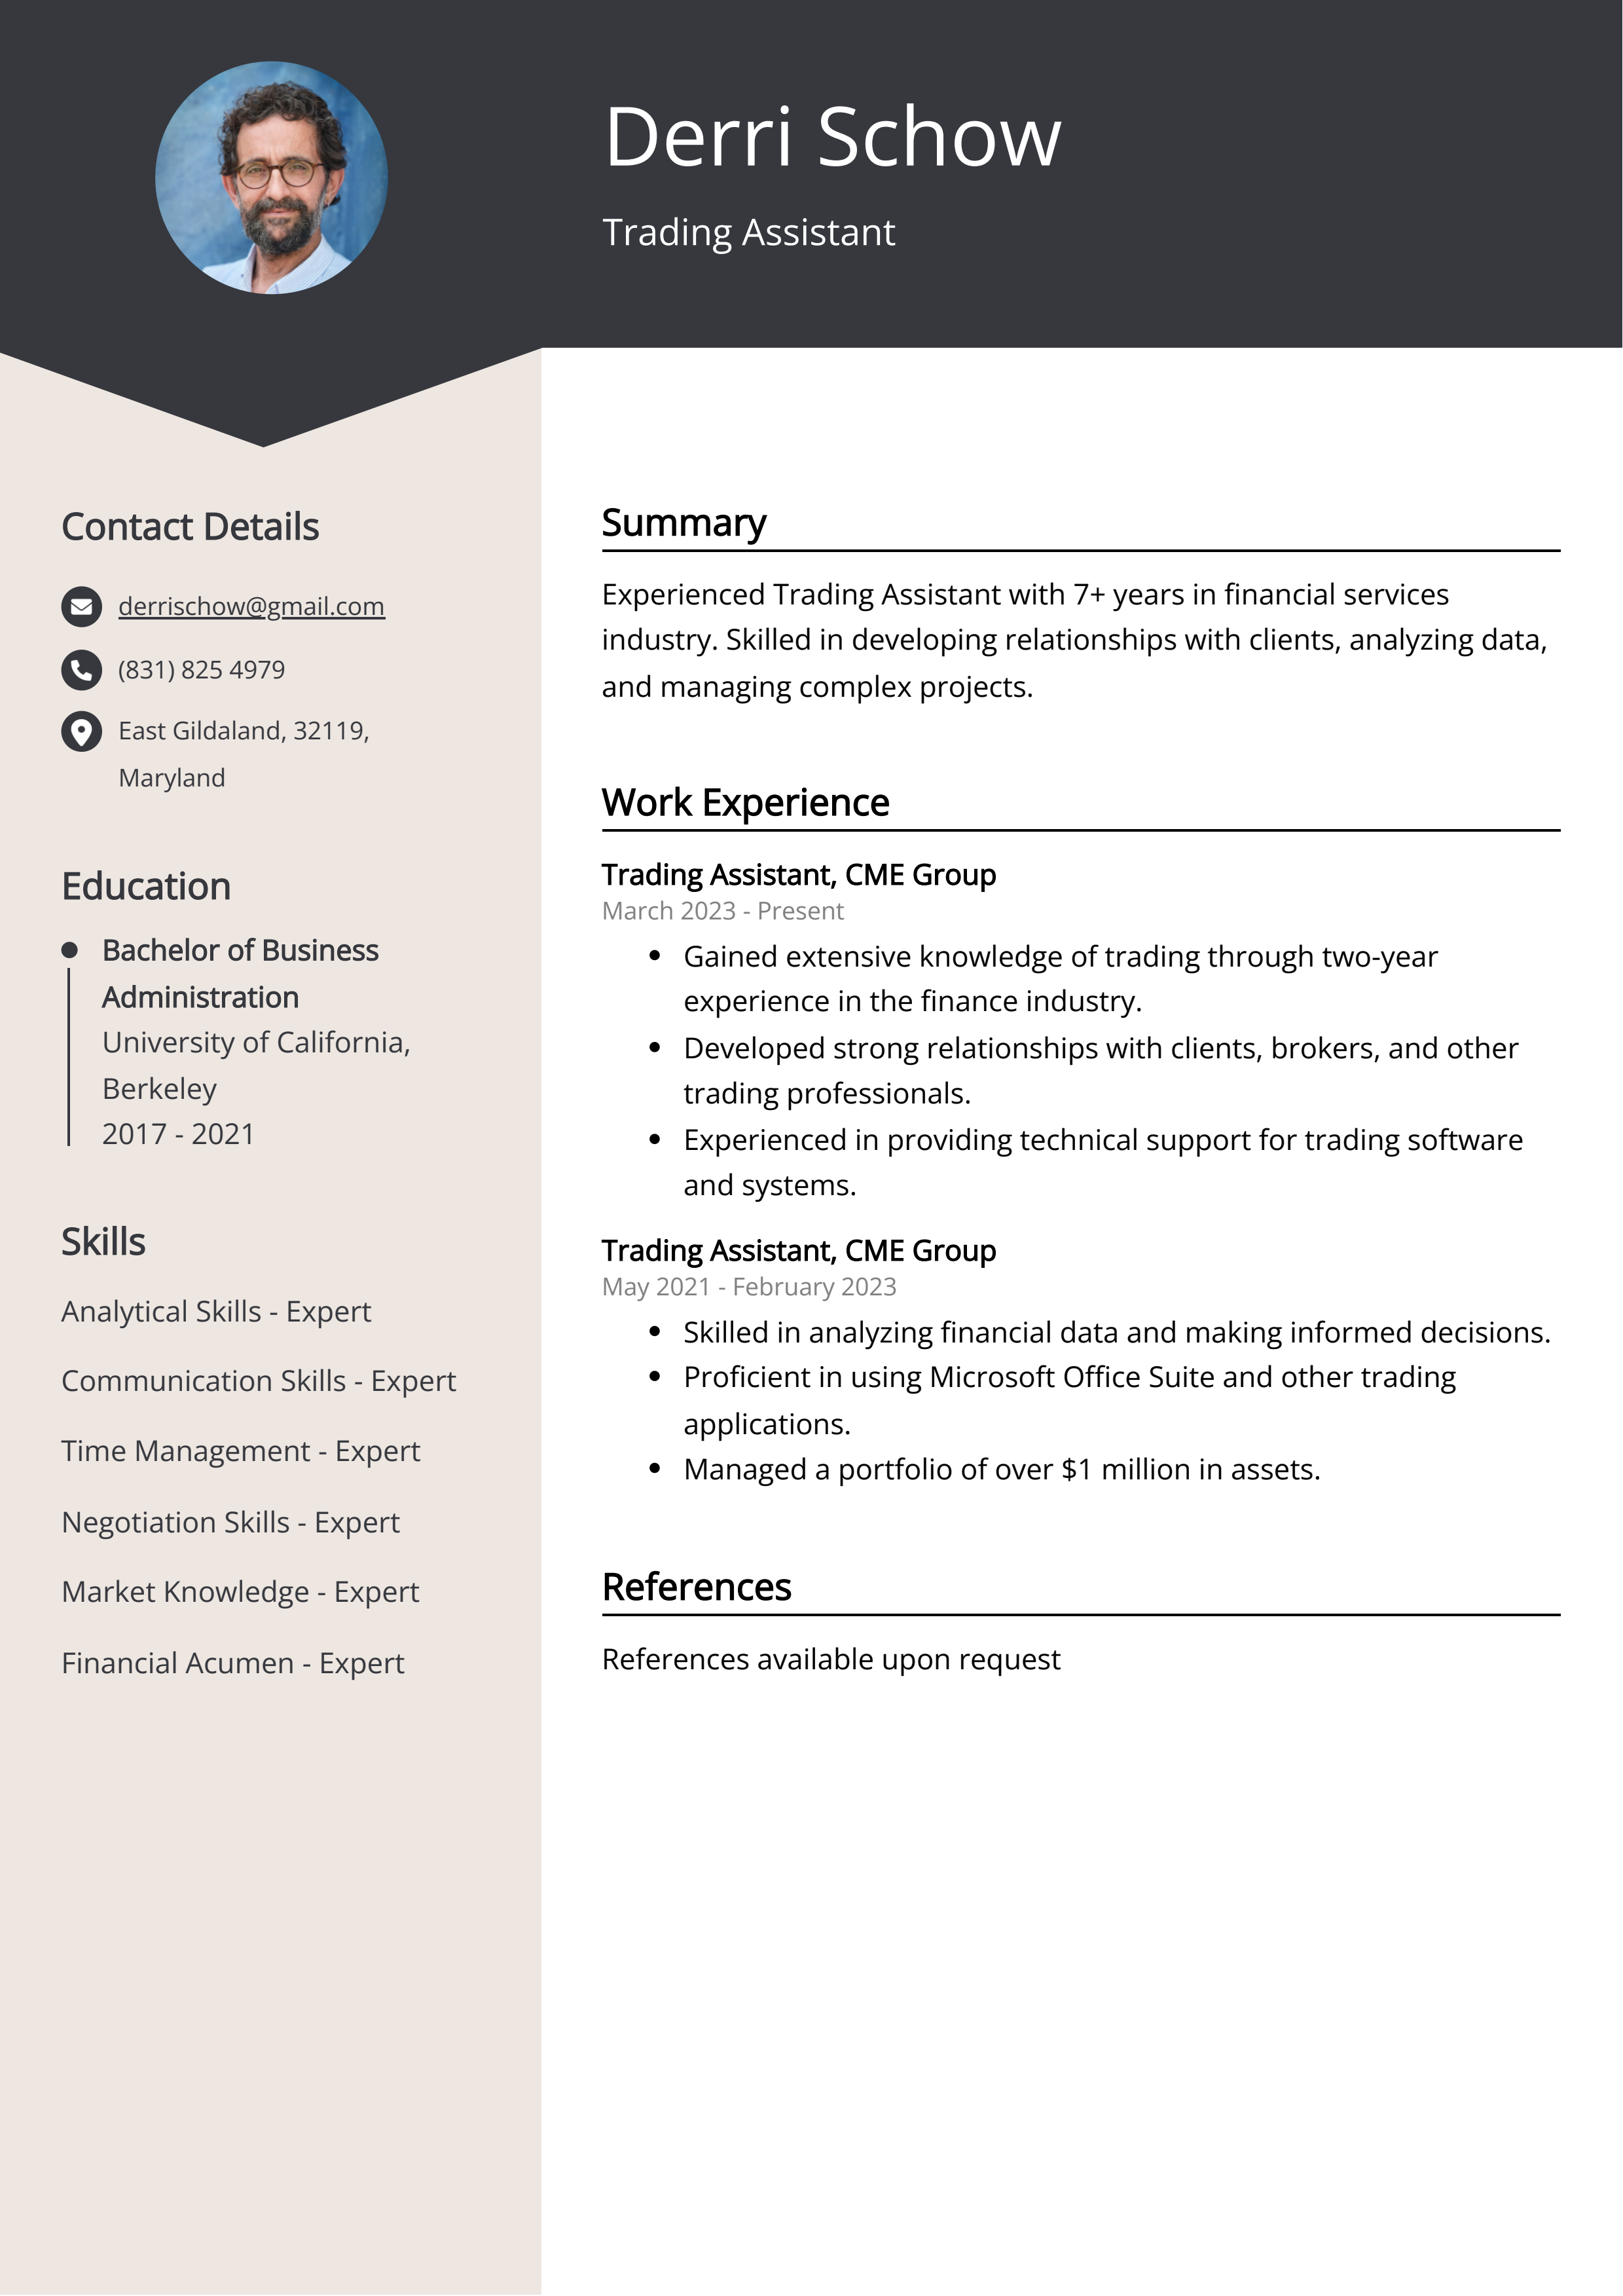 Trading Assistant CV Example